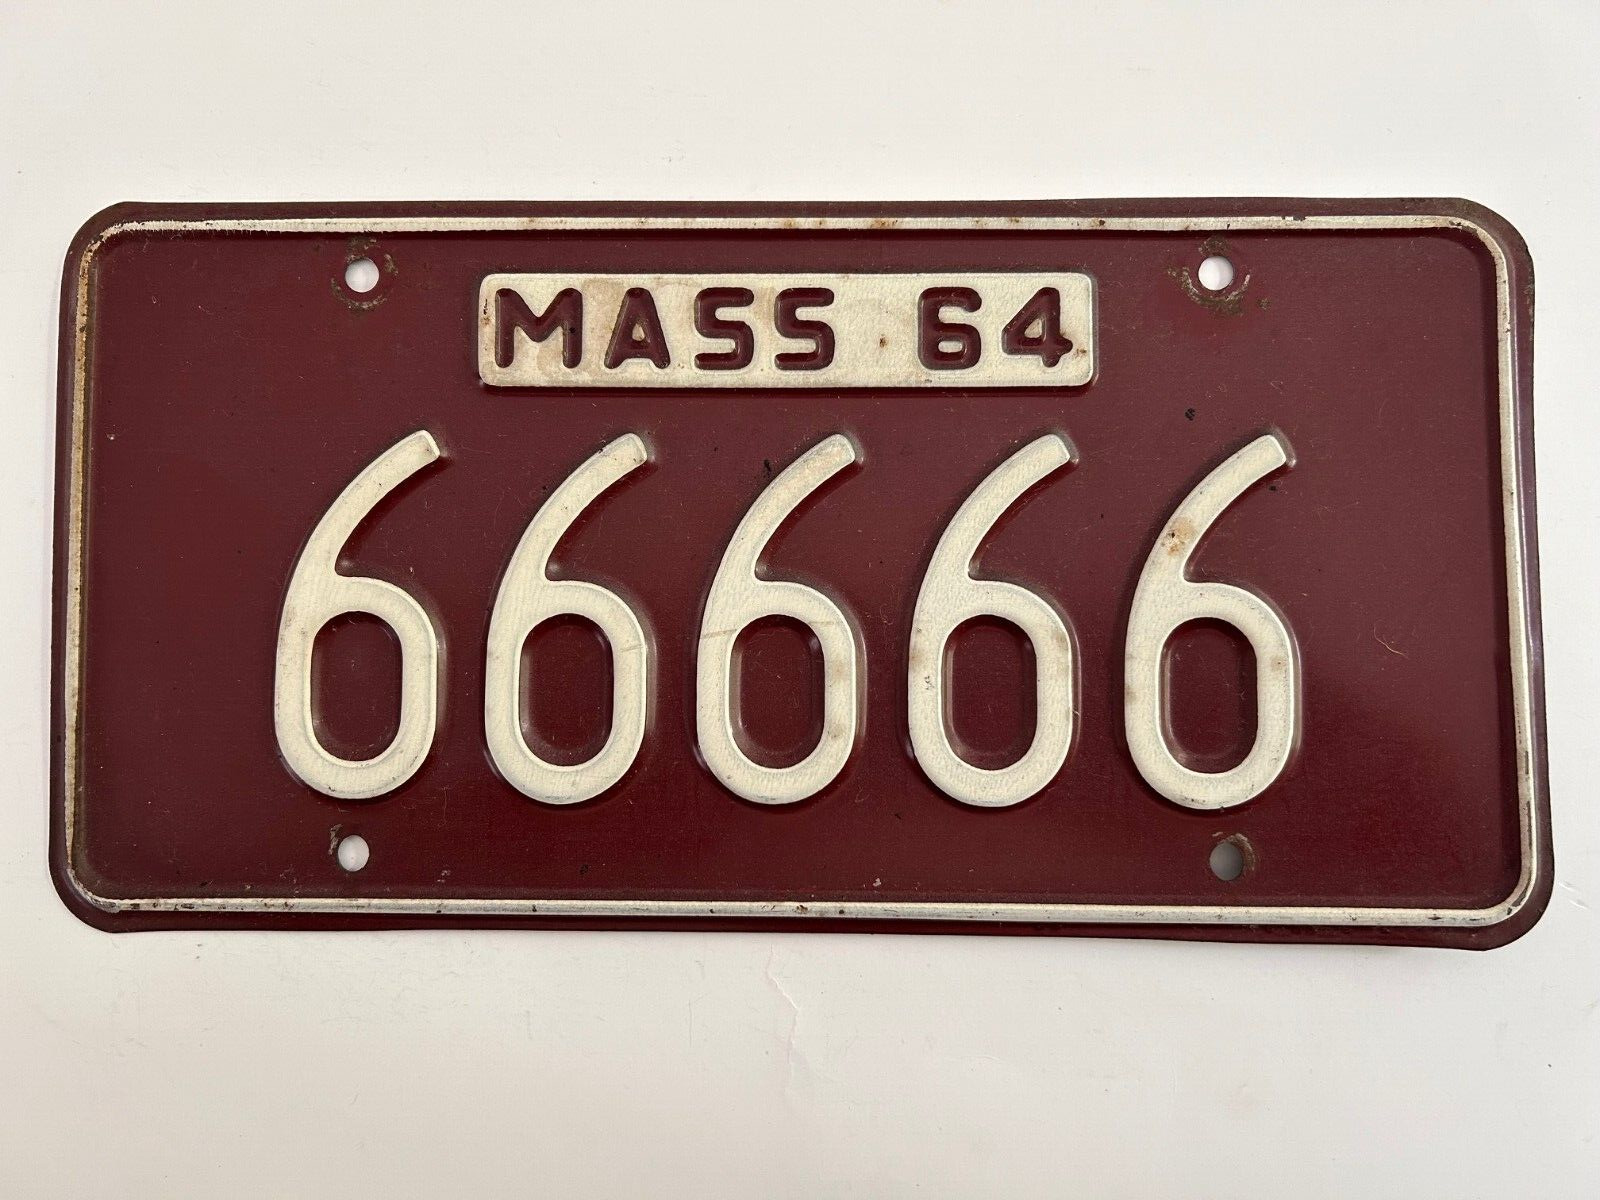 1964 Massachusetts License Plate Rare Repeating Number 6\'s 66666